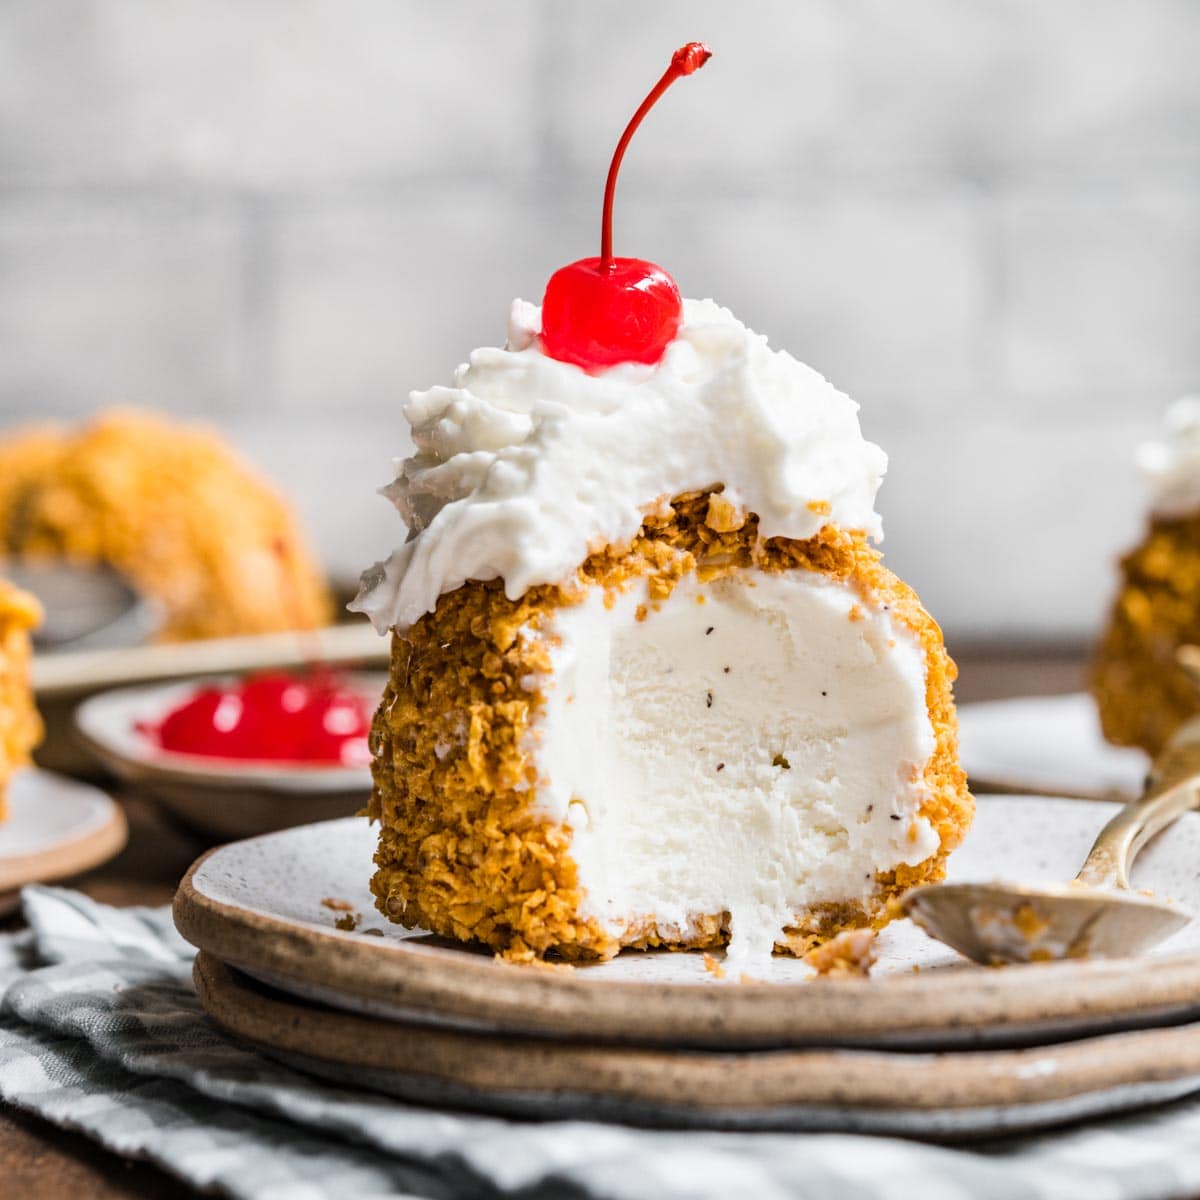 Healthier Air Fryer Fried Ice Cream Recipe • The Fresh Cooky